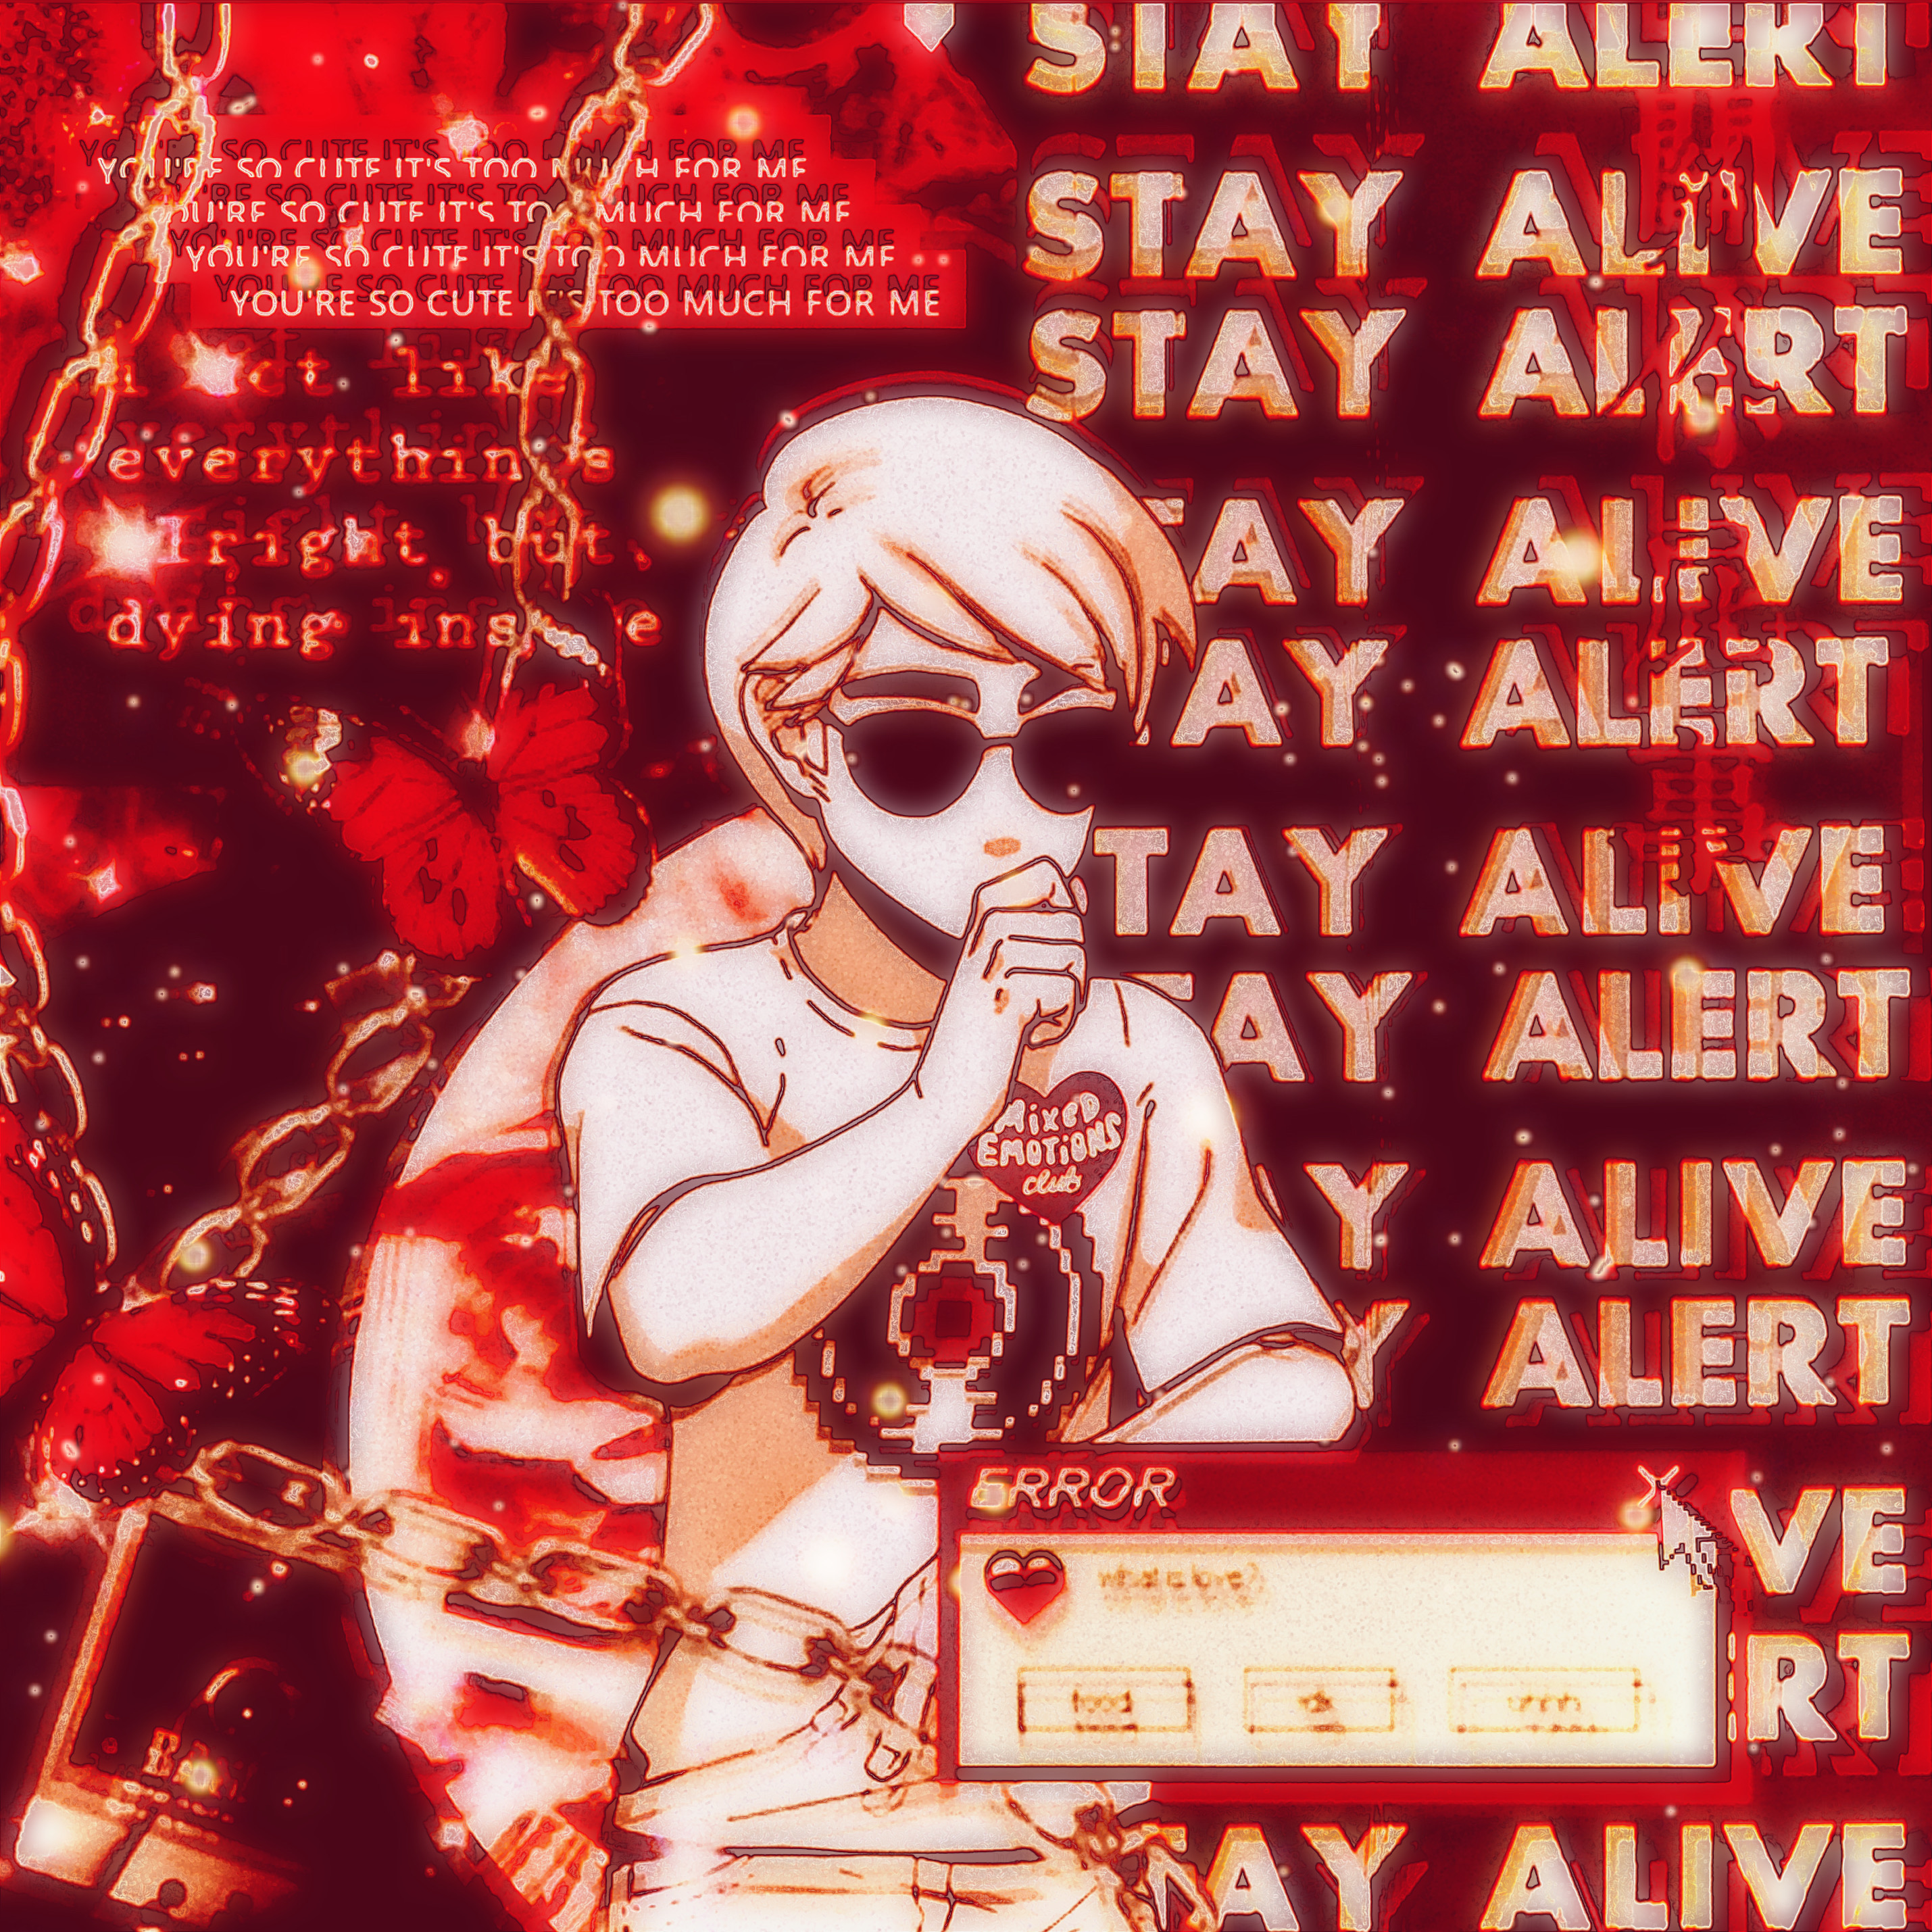 homestuck hs red Image by ♡︎ 𝚛𝚎𝚚𝚜 𝚘𝚙𝚎𝚗! ♡︎